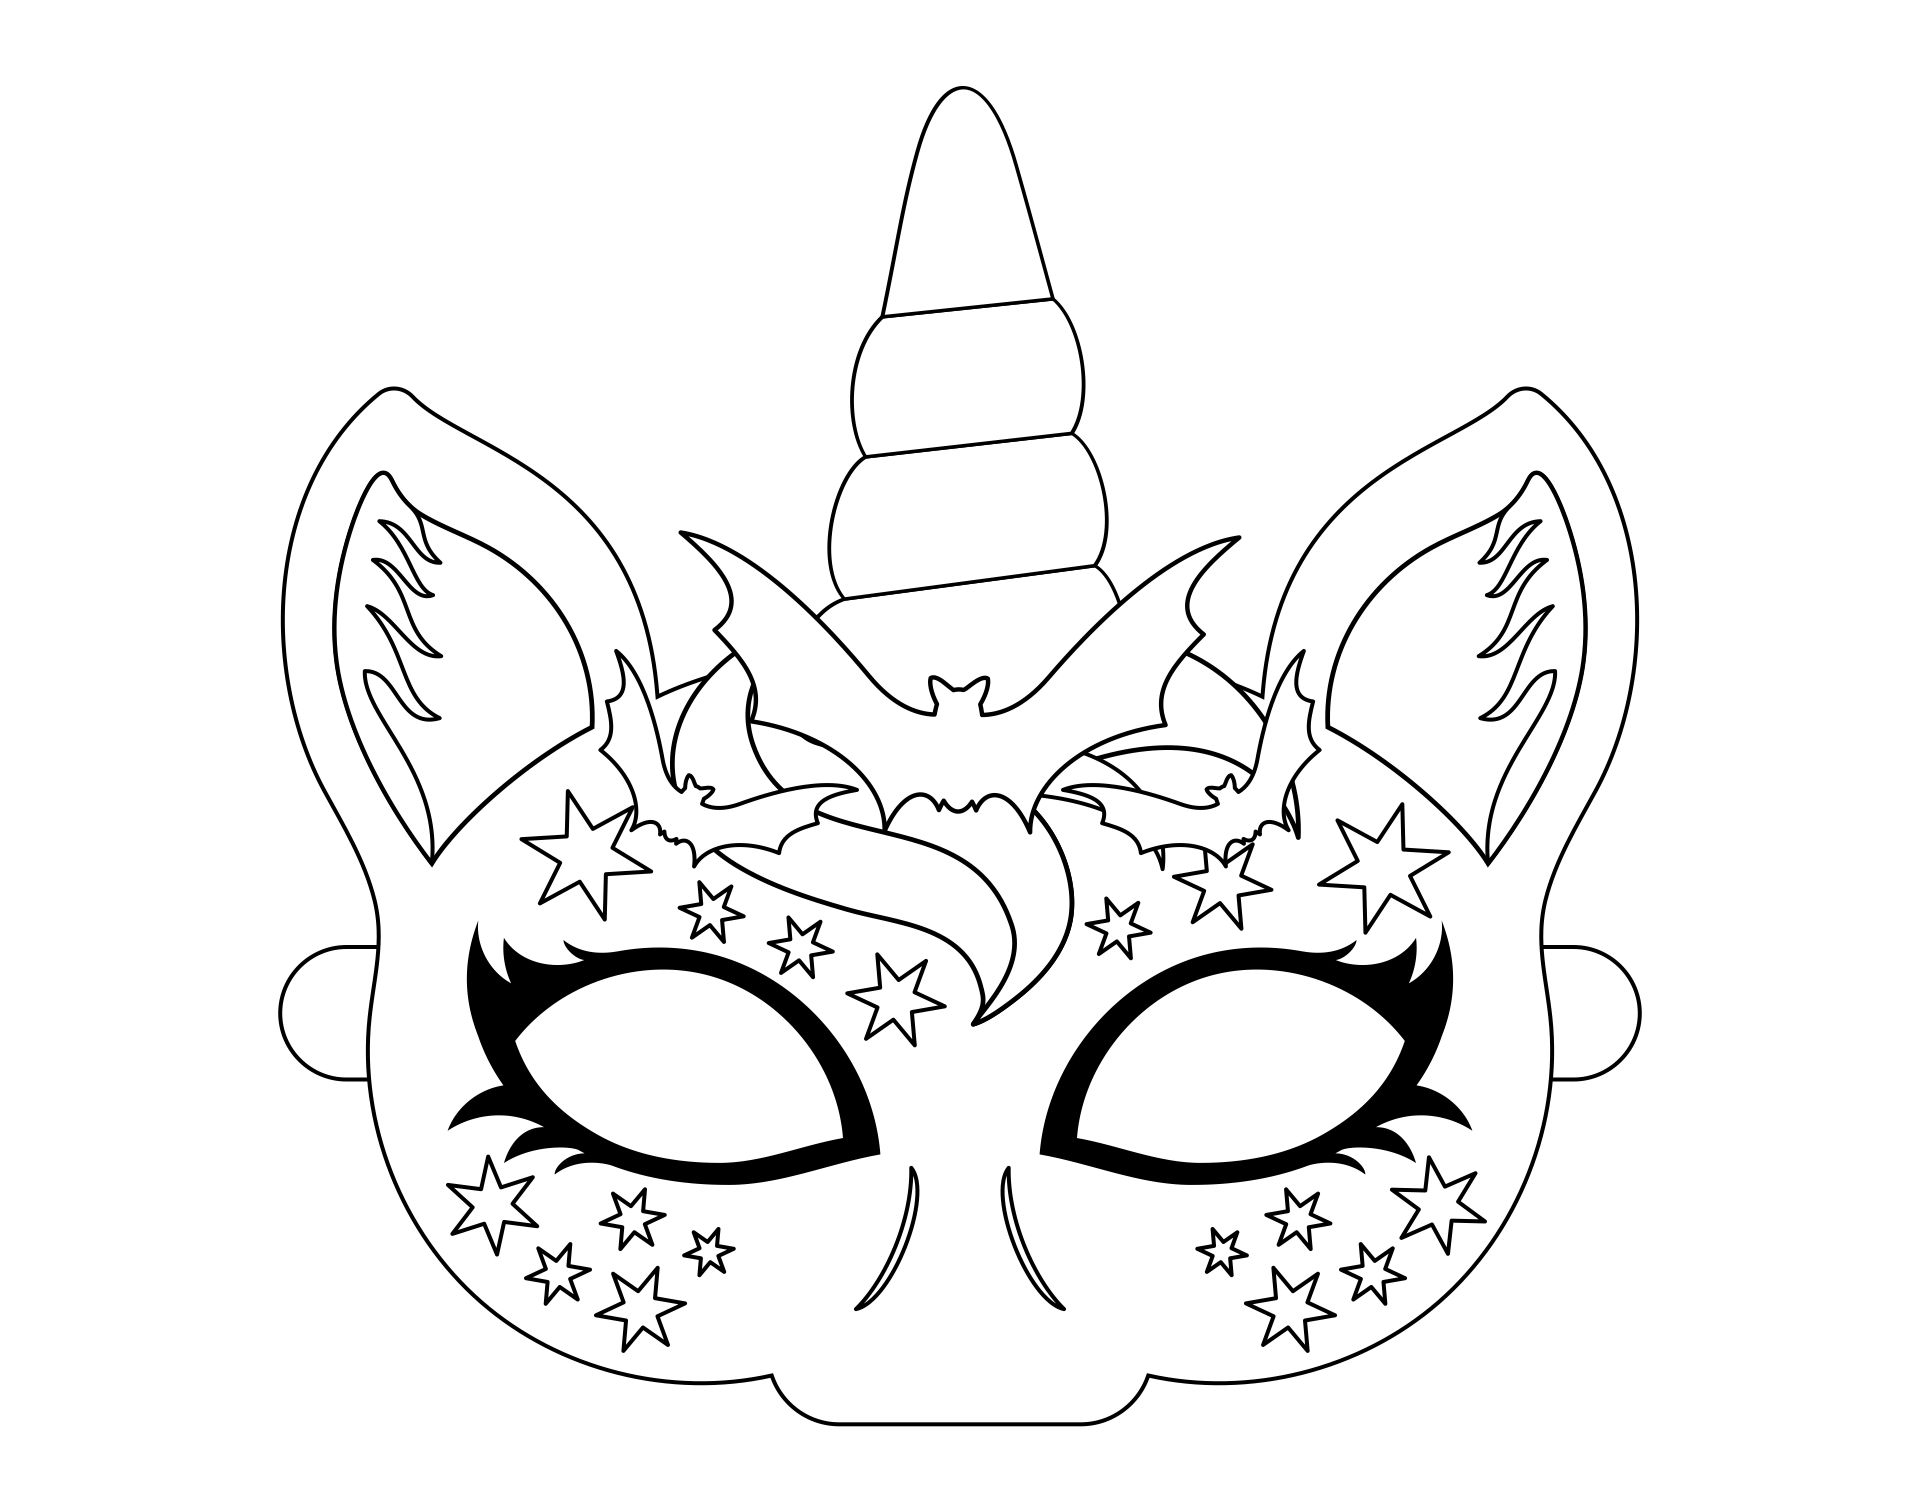 15 Best Face Coloring Printable Halloween Masks PDF for Free at Printablee